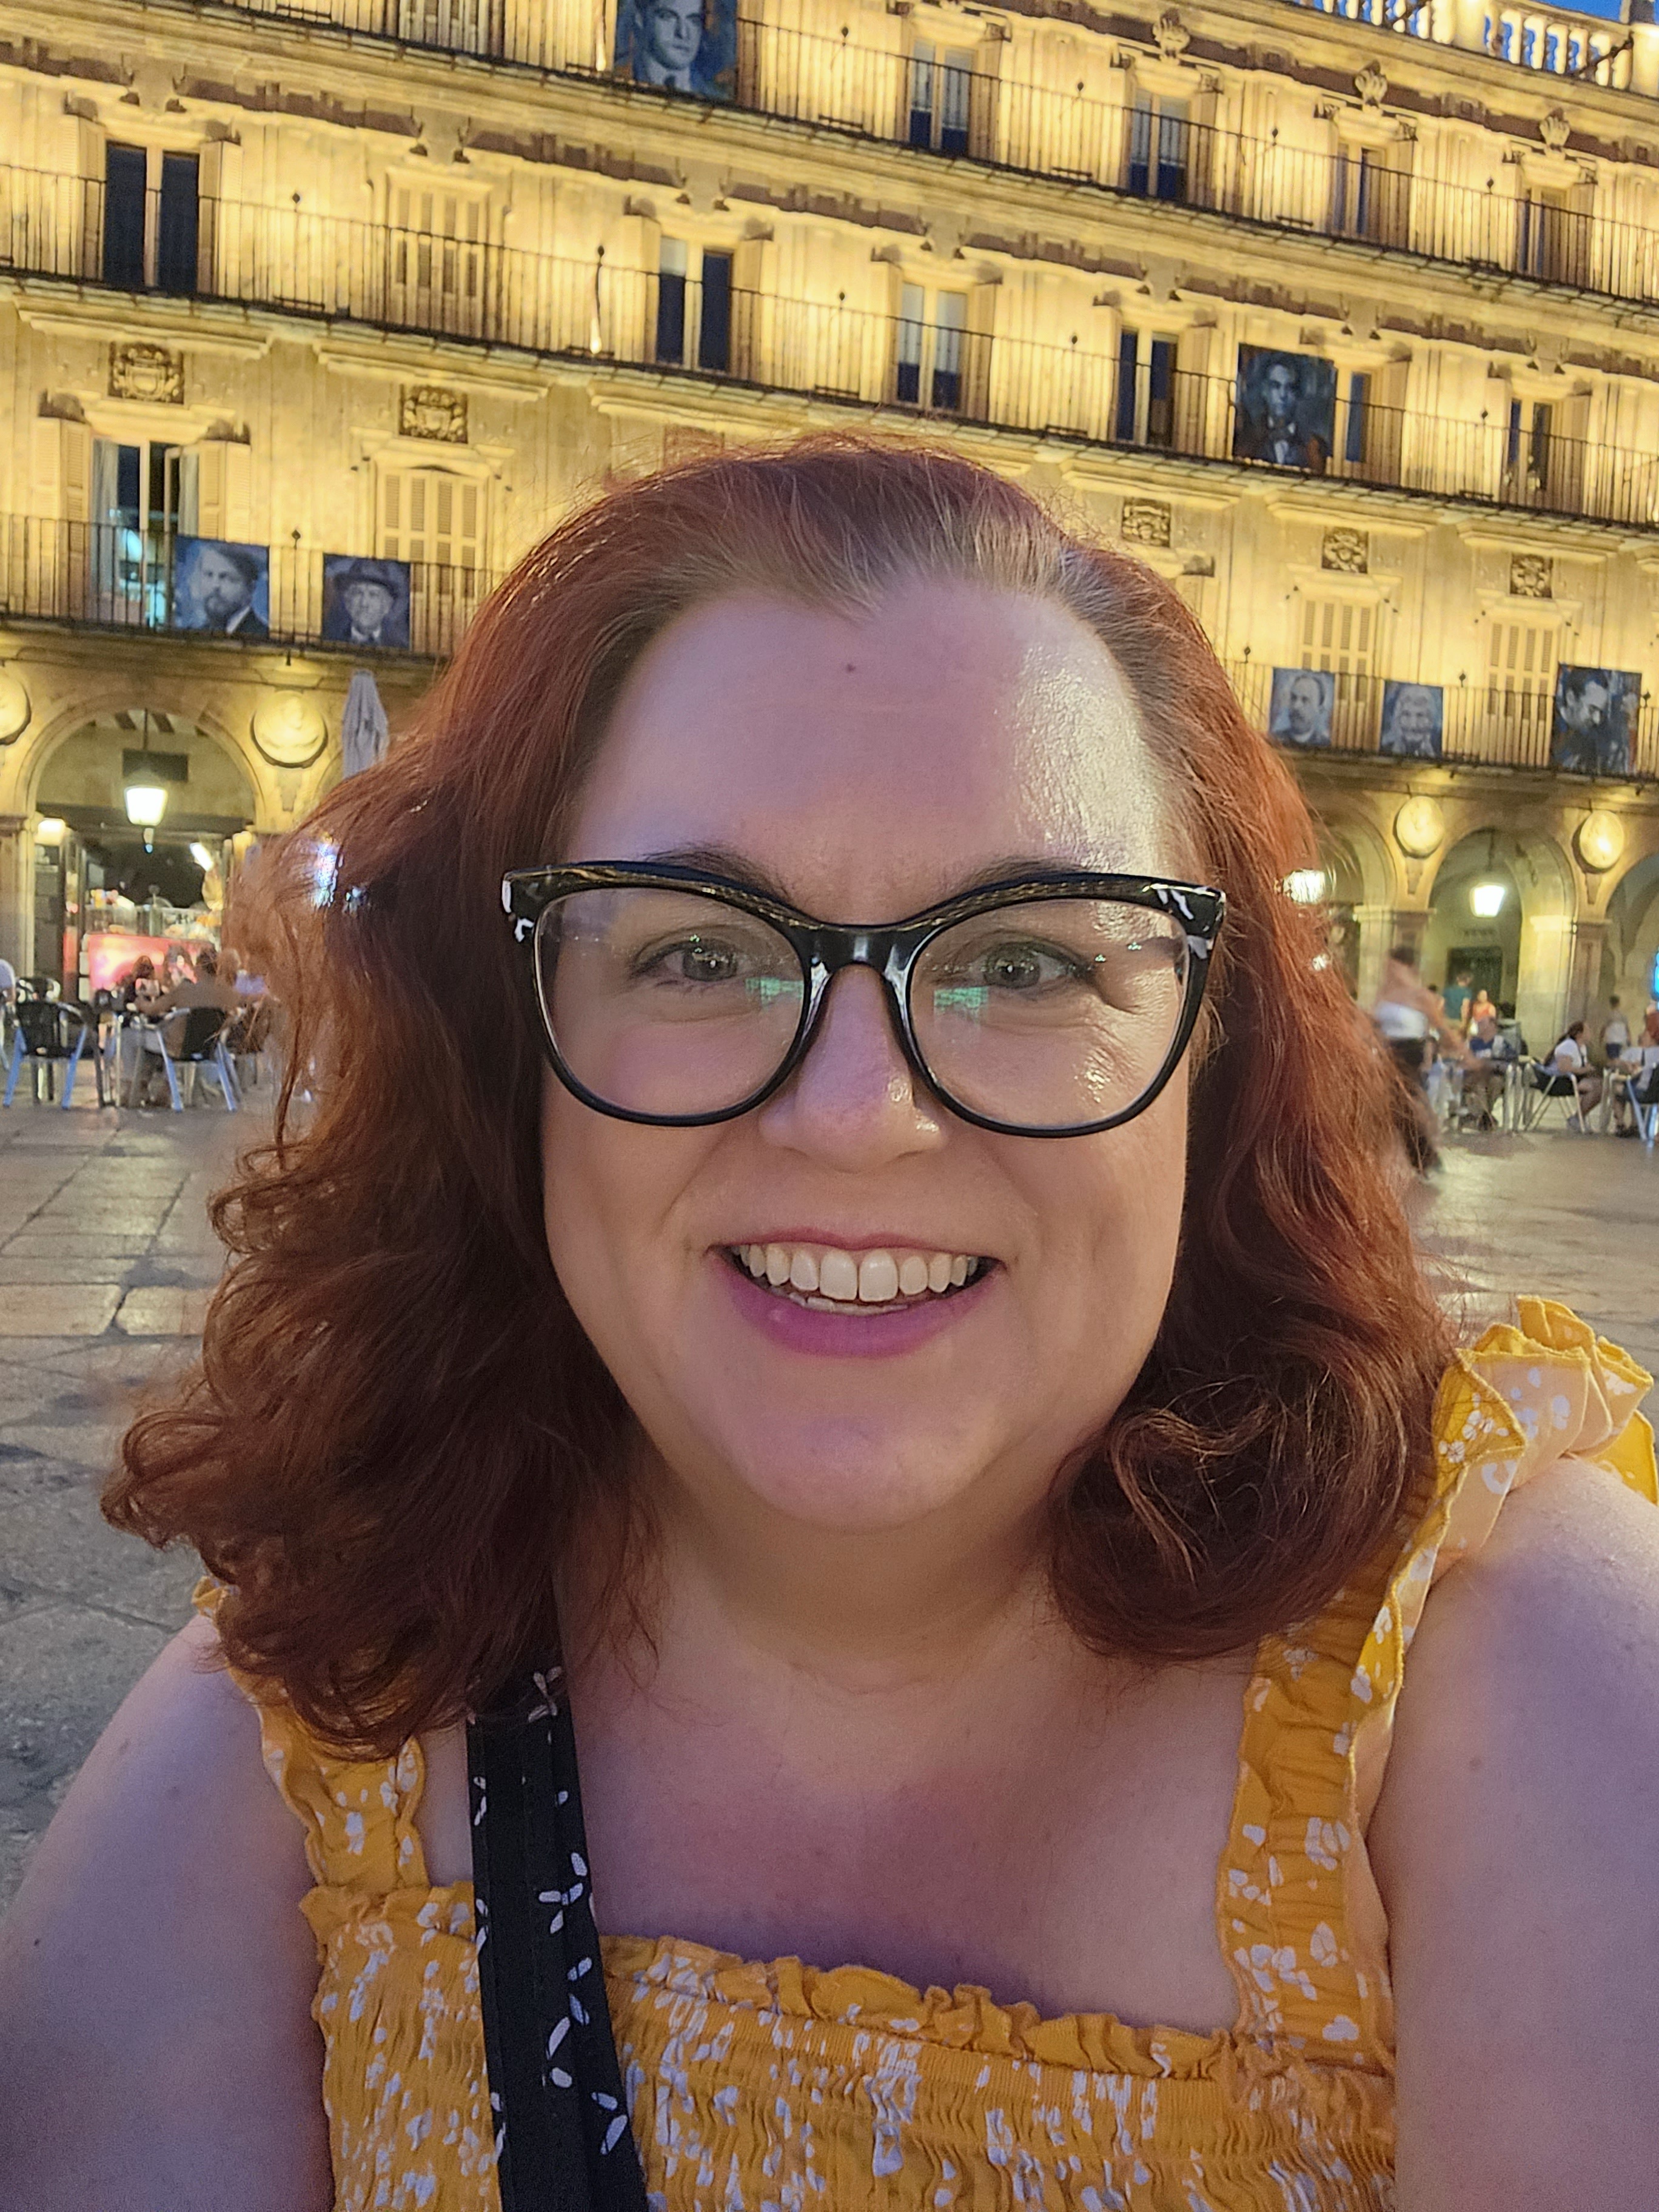 Melanie D'Amico takes a self-portrait while traveling abroad in Spain. She has curling, red hair and large, cat-eye glasses, and wears a yellow top.